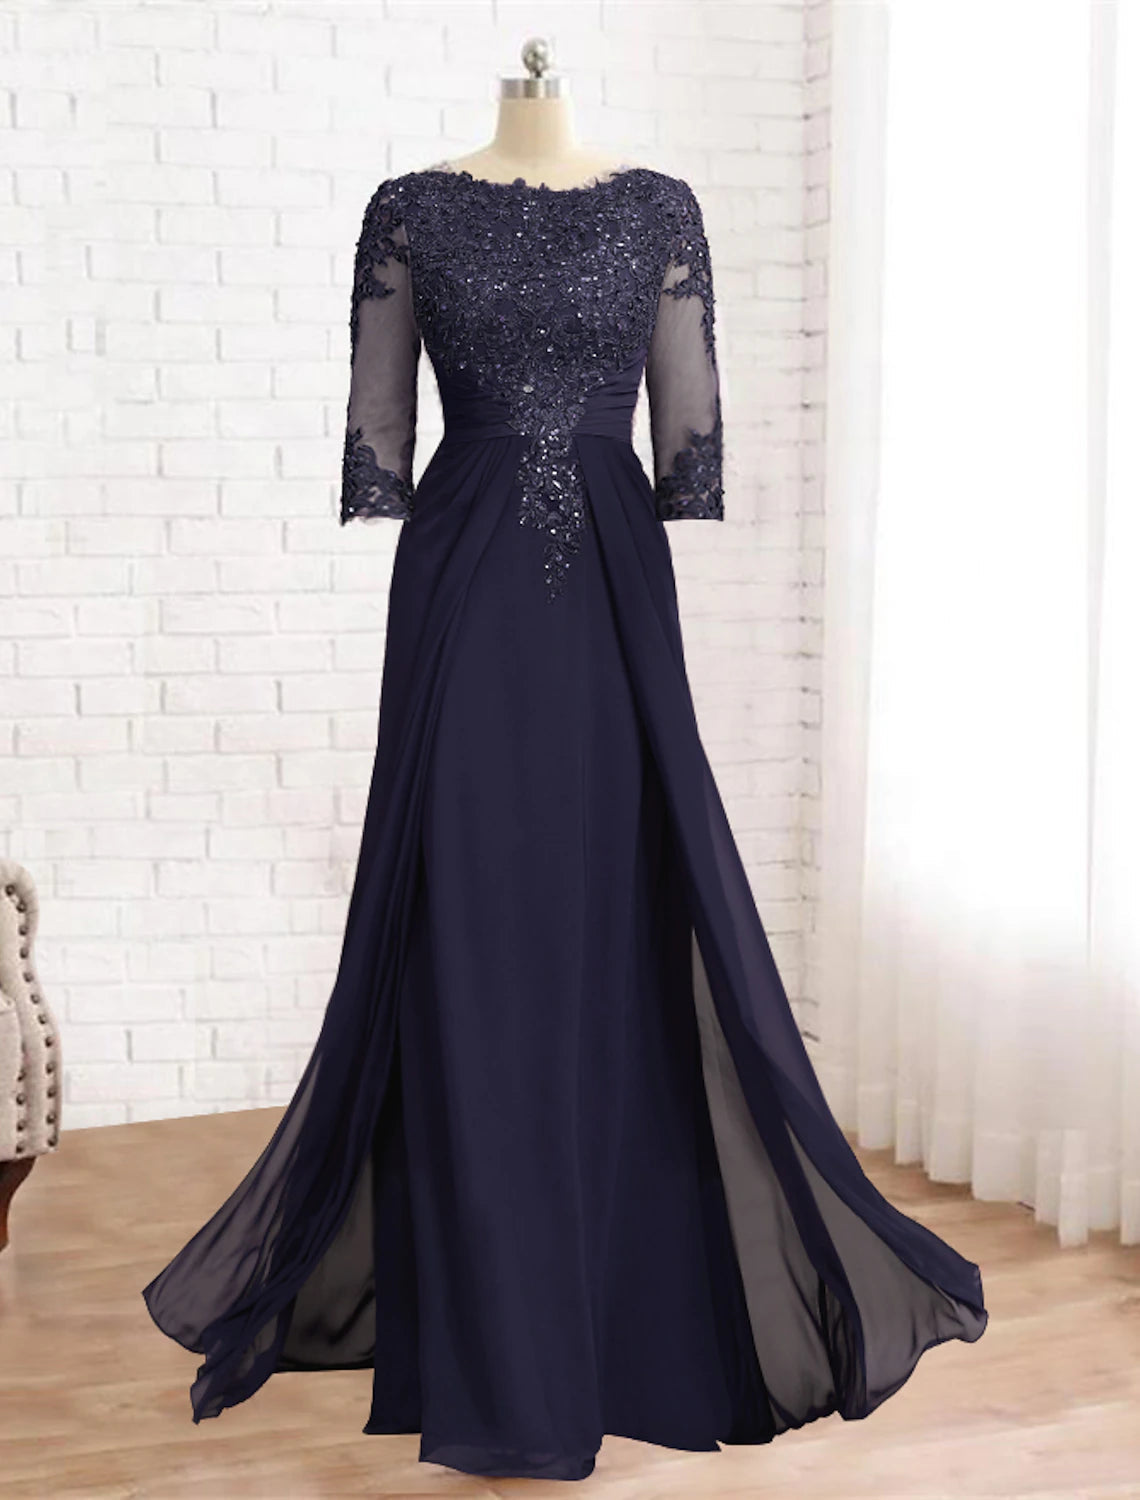 Sheath / Column Mother of the Bride Dress Formal Fall Wedding Guest Elegant Sequin Scoop Neck Floor Length Chiffon Lace 3/4 Sleeve with Appliques Sparkle